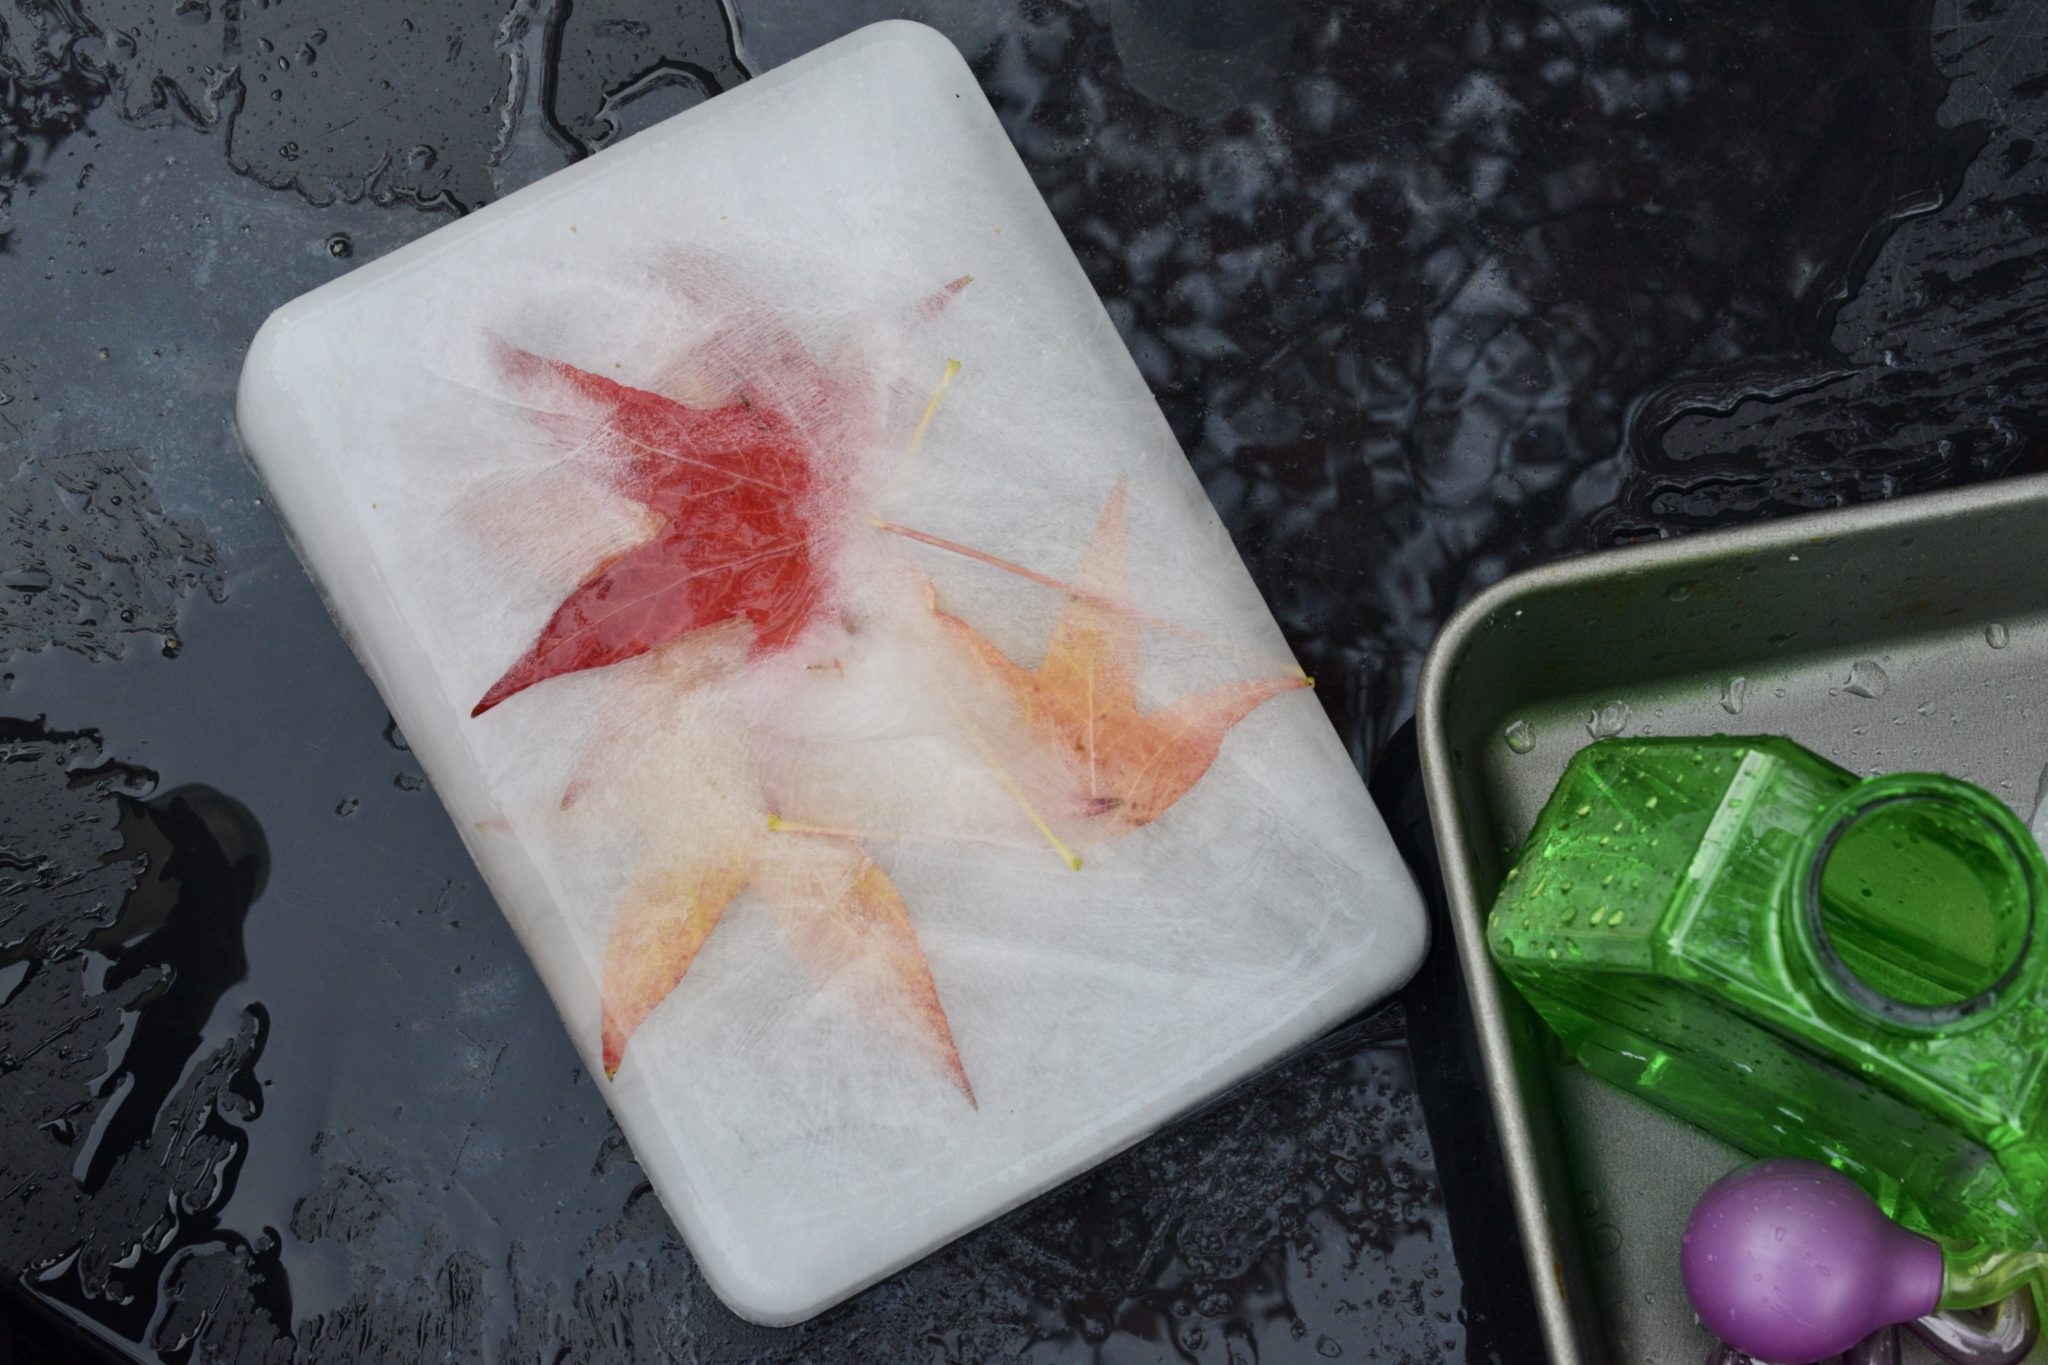 autumn leaves frozen in ice for an ice excavation science activity